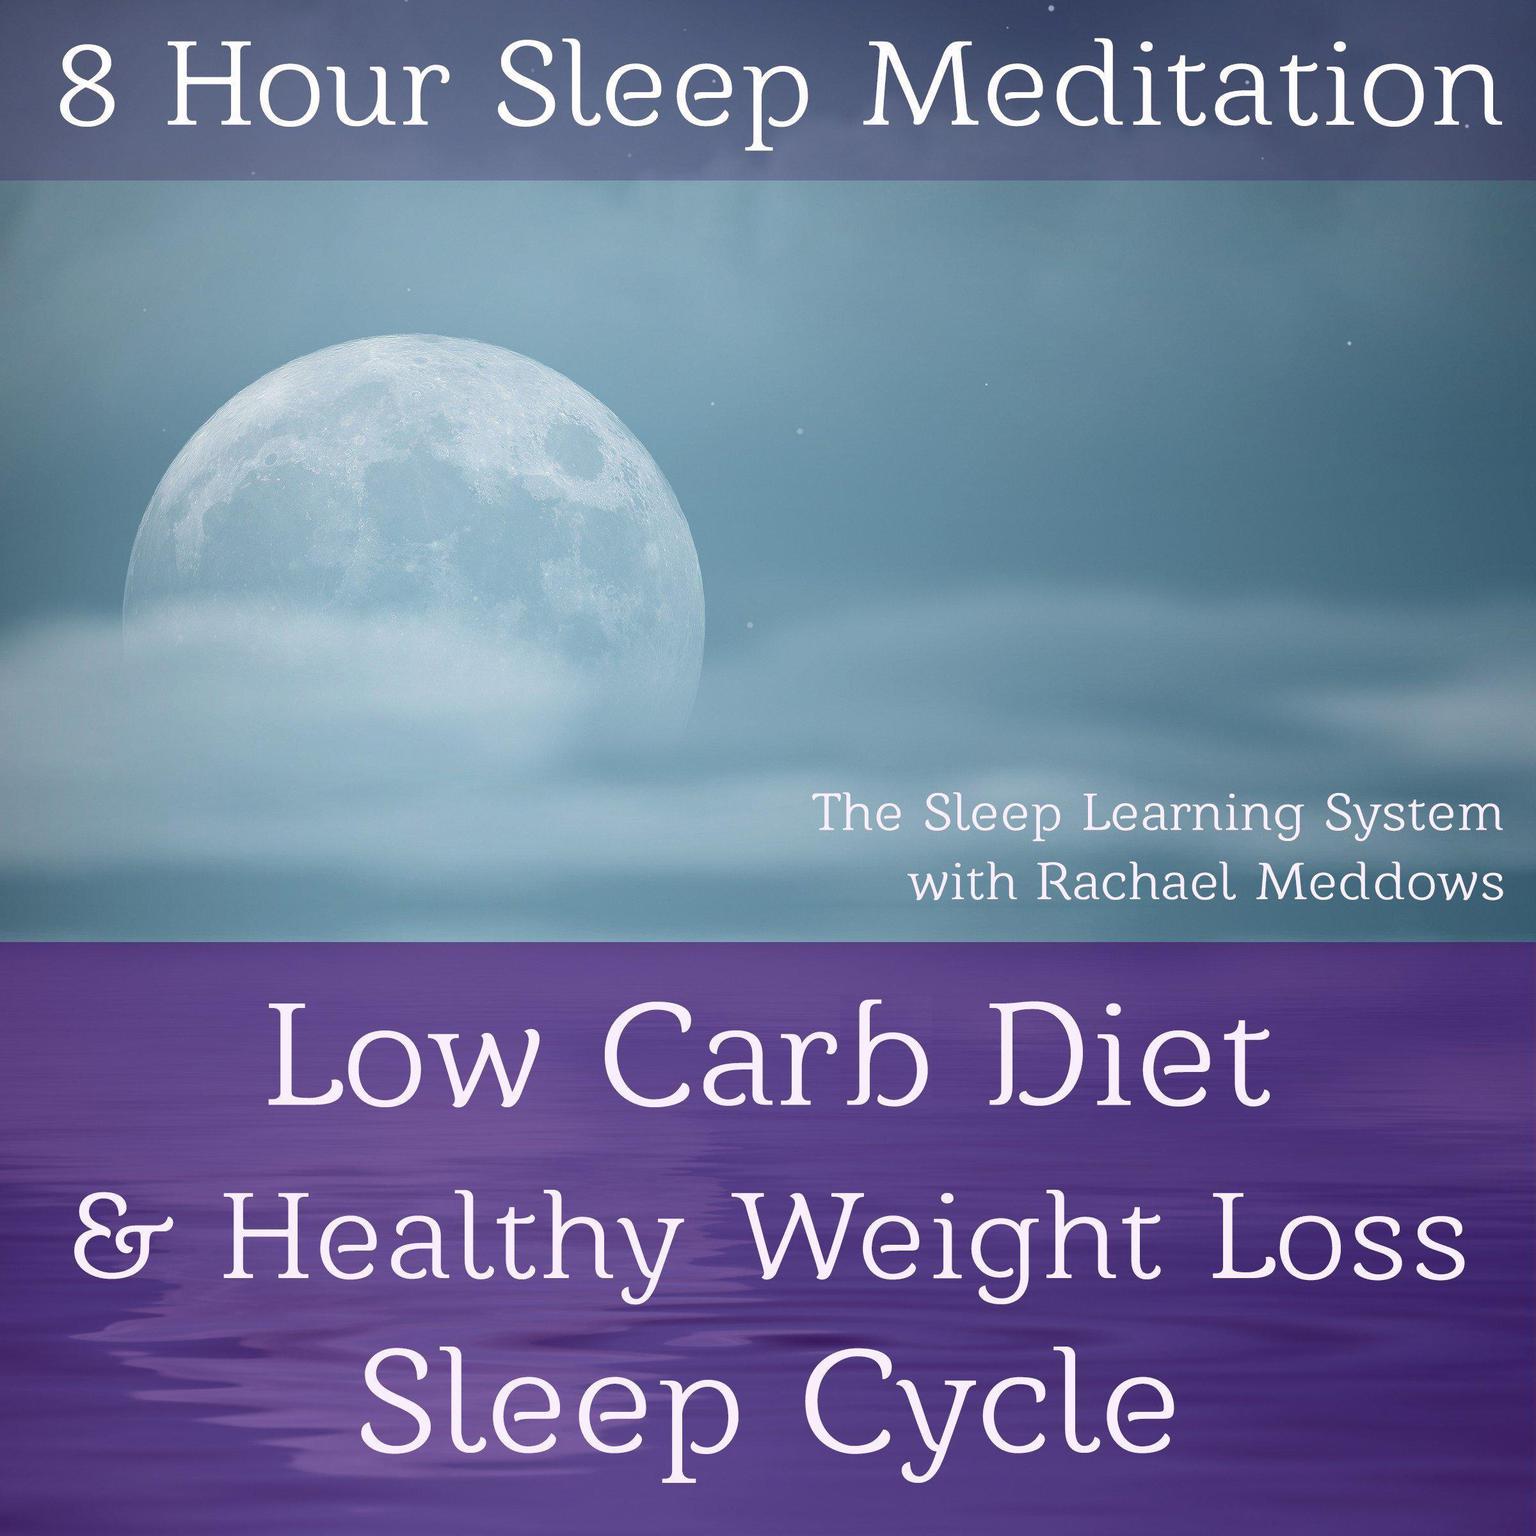 8 Hour Sleep Meditation - Low Carb Diet & Healthy Weight Loss Sleep Cycle (The Sleep Learning System with Rachael Meddows) Audiobook, by Joel Thielke